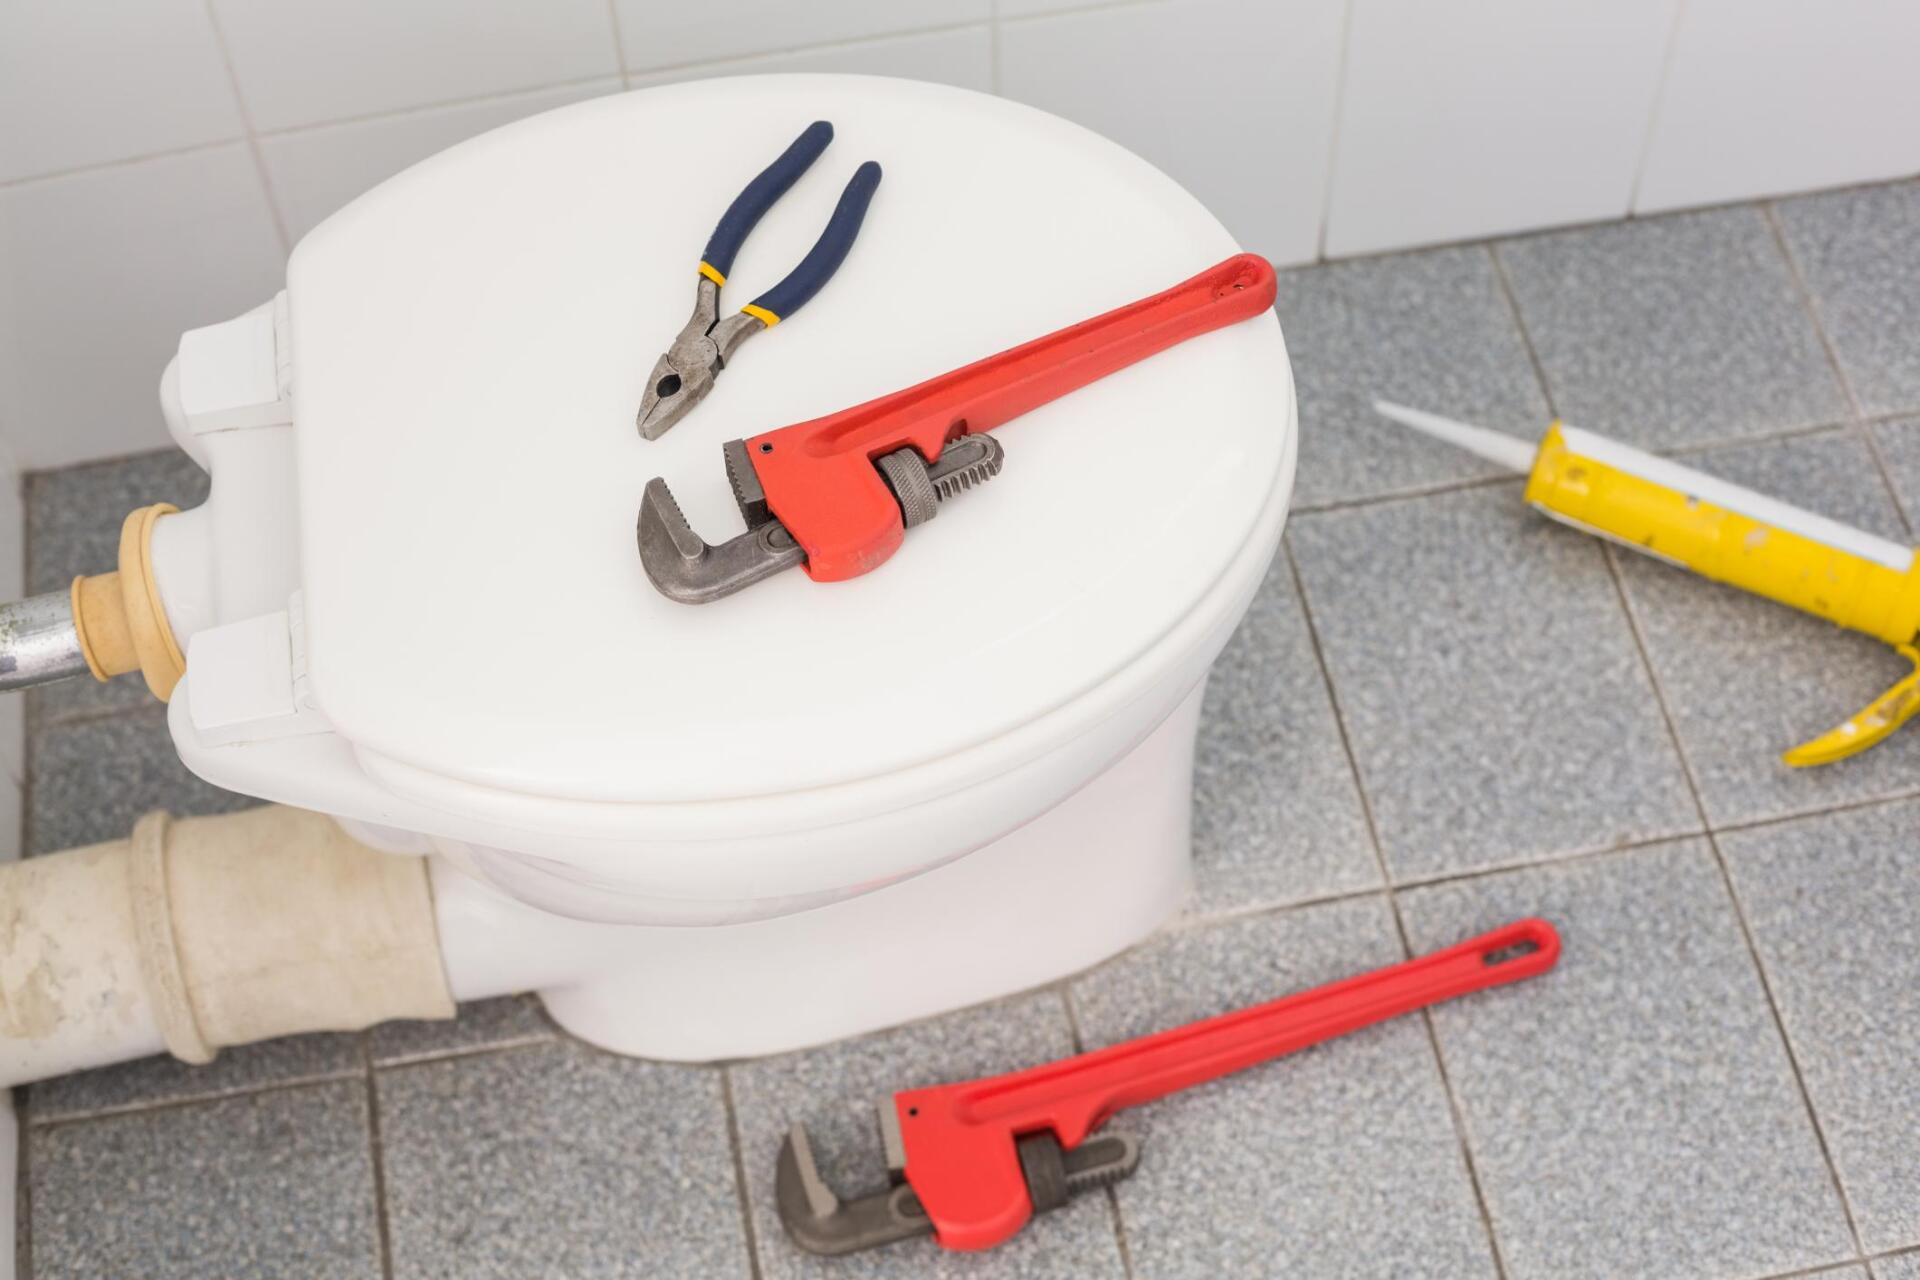 plier and wrench in the toilet bowl